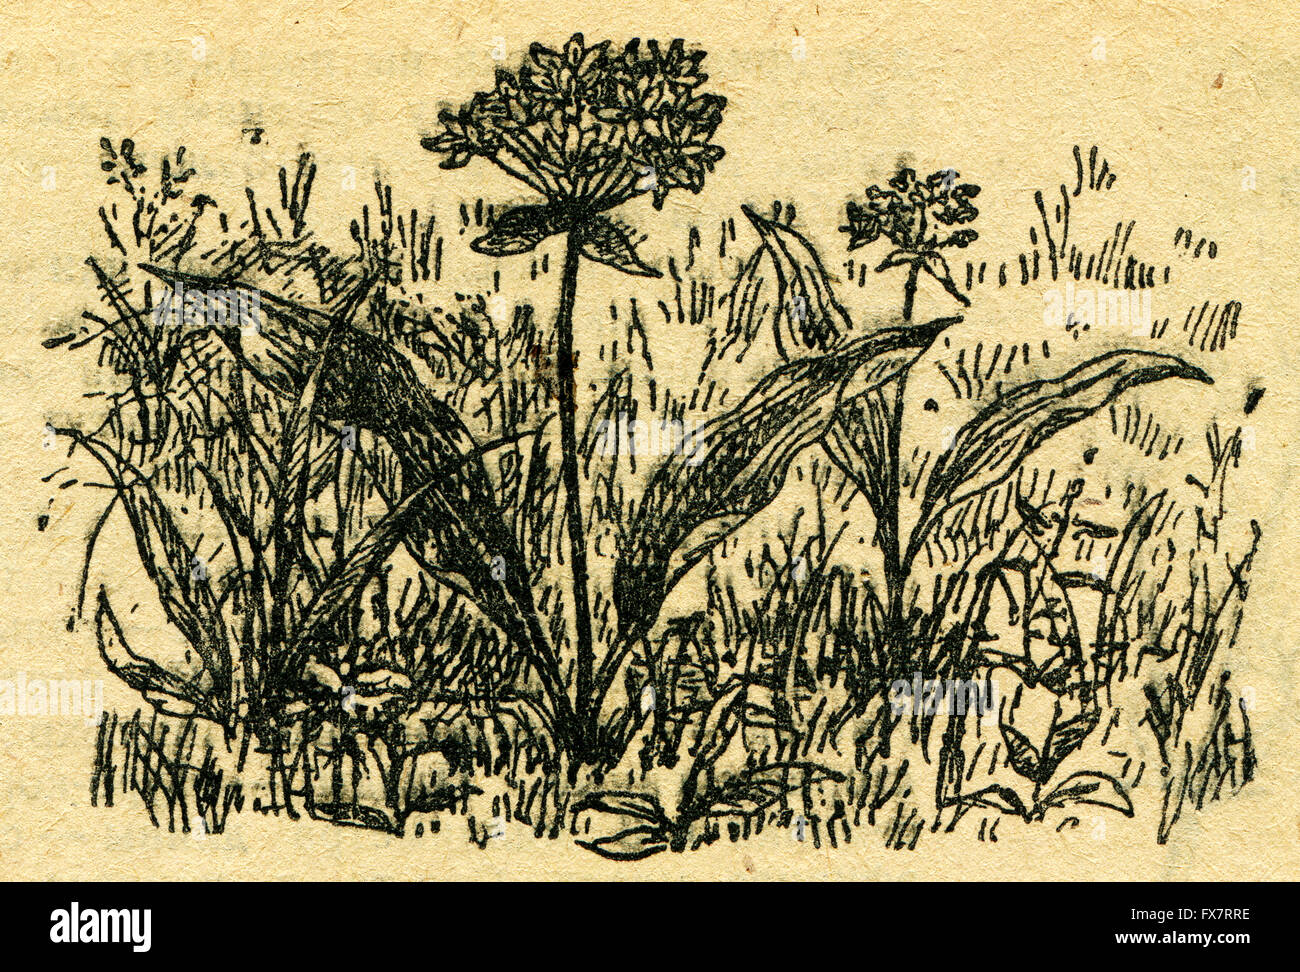 Ramsons, Allium ursinum — also known as buckrams, wild garlic, broad-leaved garlic, wood garlic, bear leek, and bear's garlic - an illustration from the book 'In the wake of Robinson Crusoe', Moscow, USSR, 1946 Stock Photo